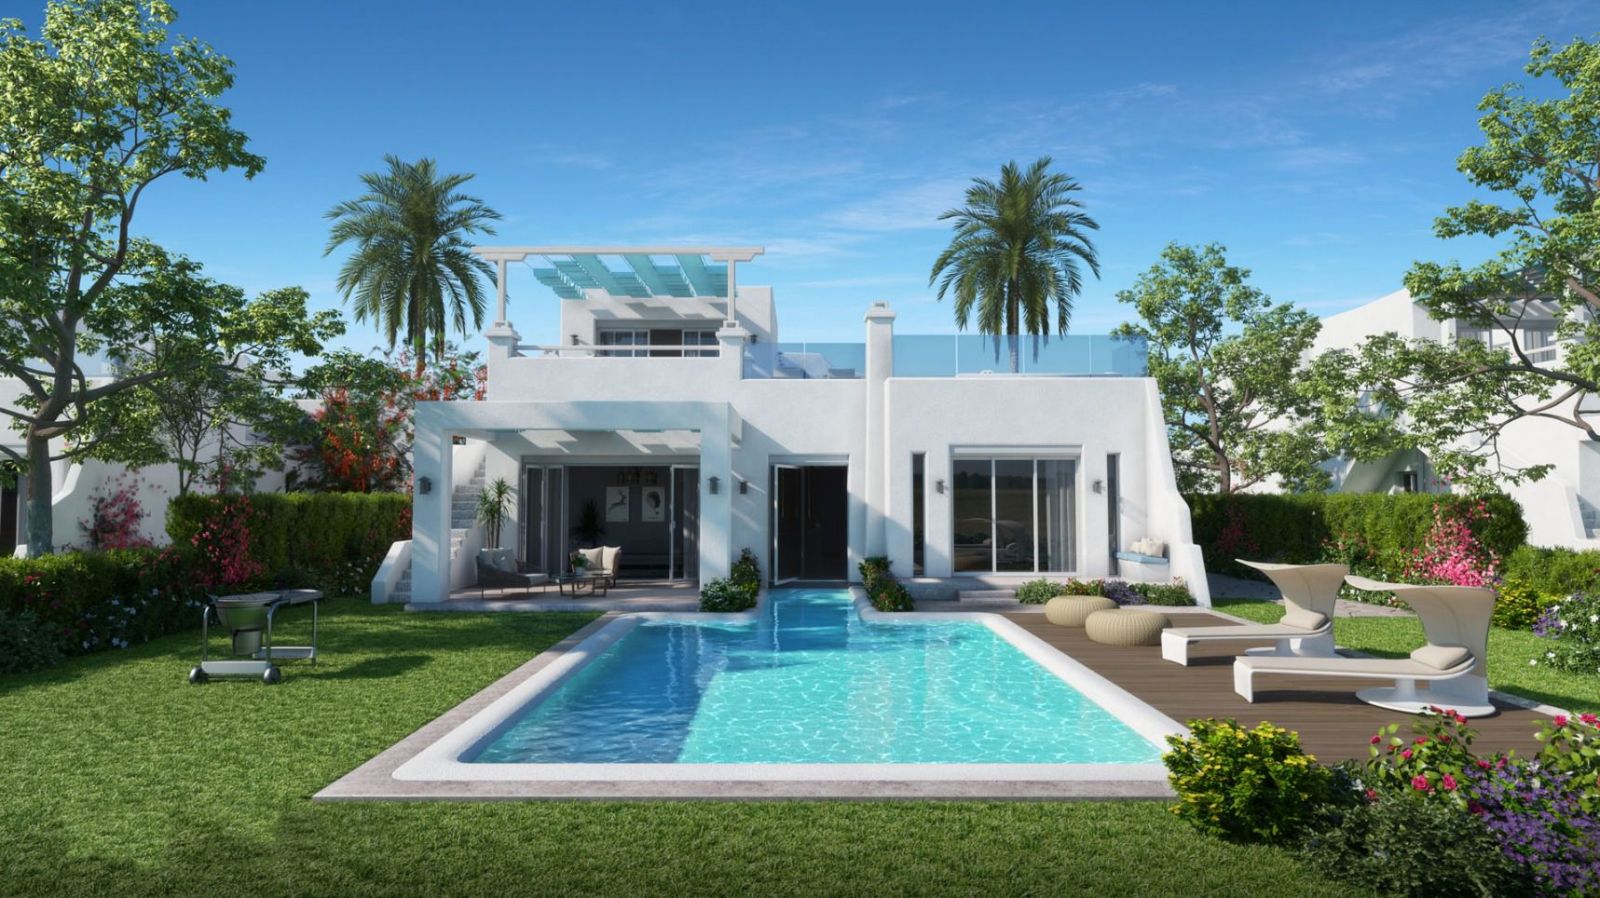 Take the opportunity and get a large villa with space of 360 meters in jefaira project